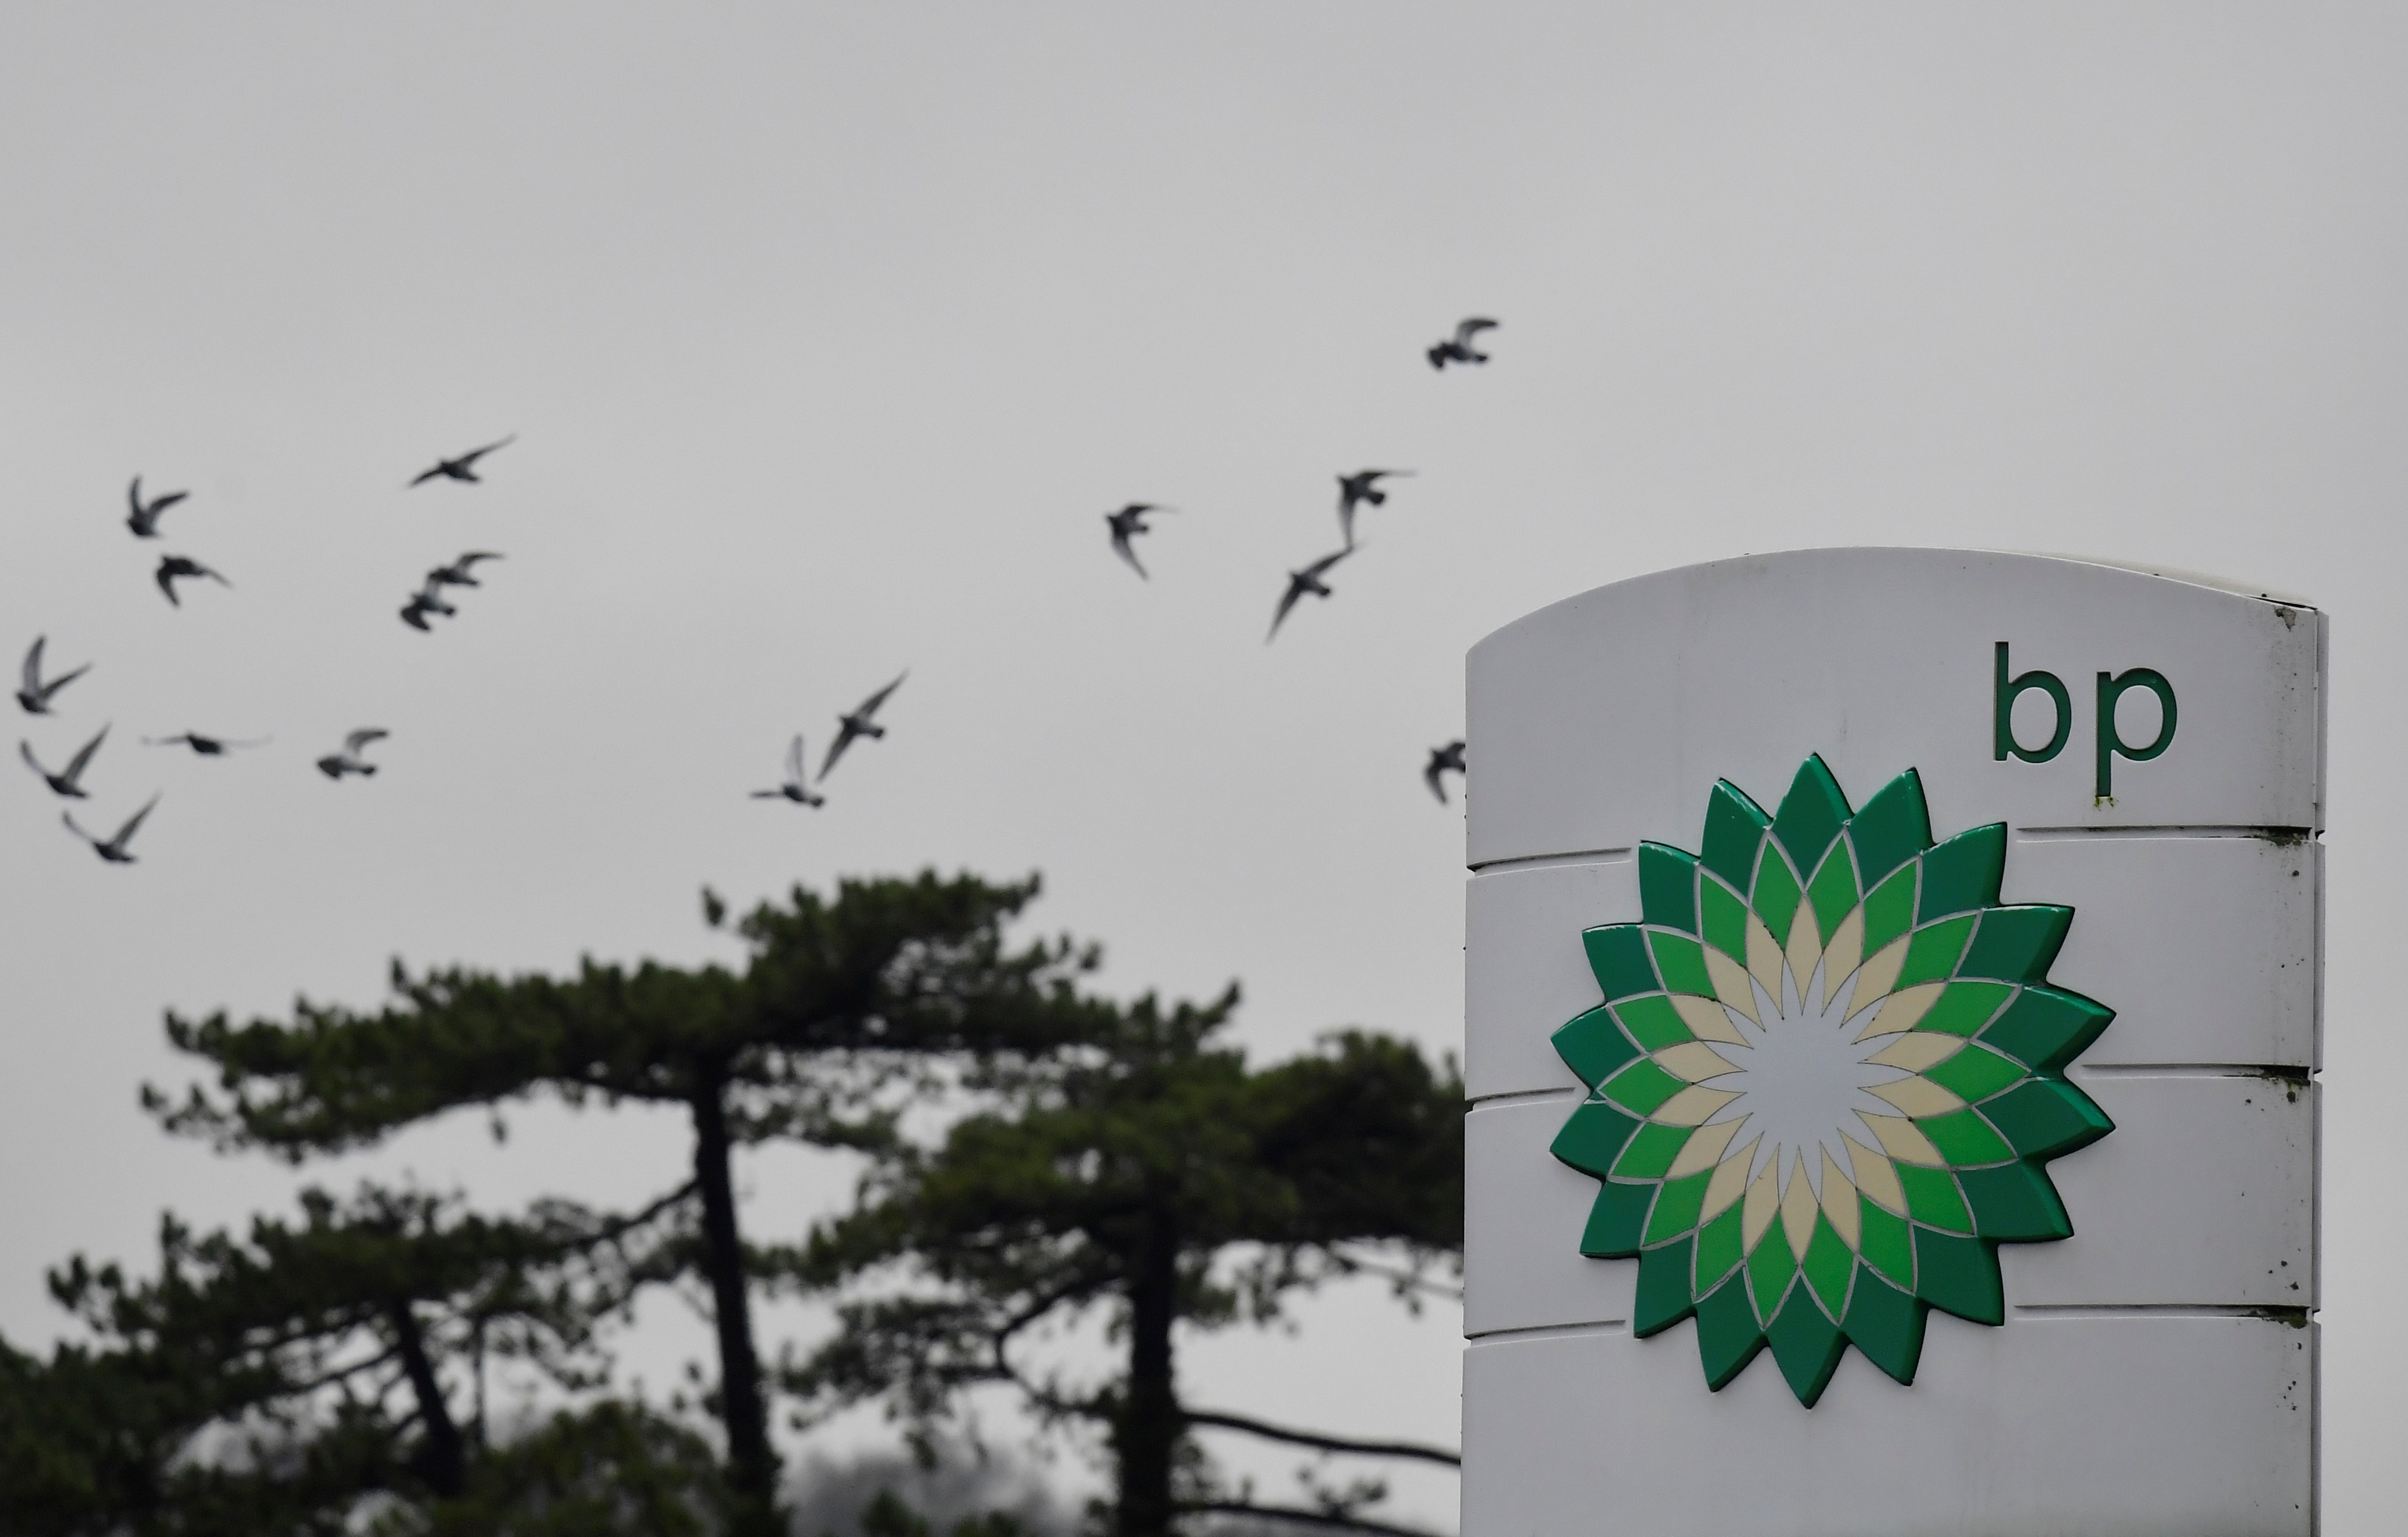 Signage is seen for BP (British Petroleum) at a service station near Brighton